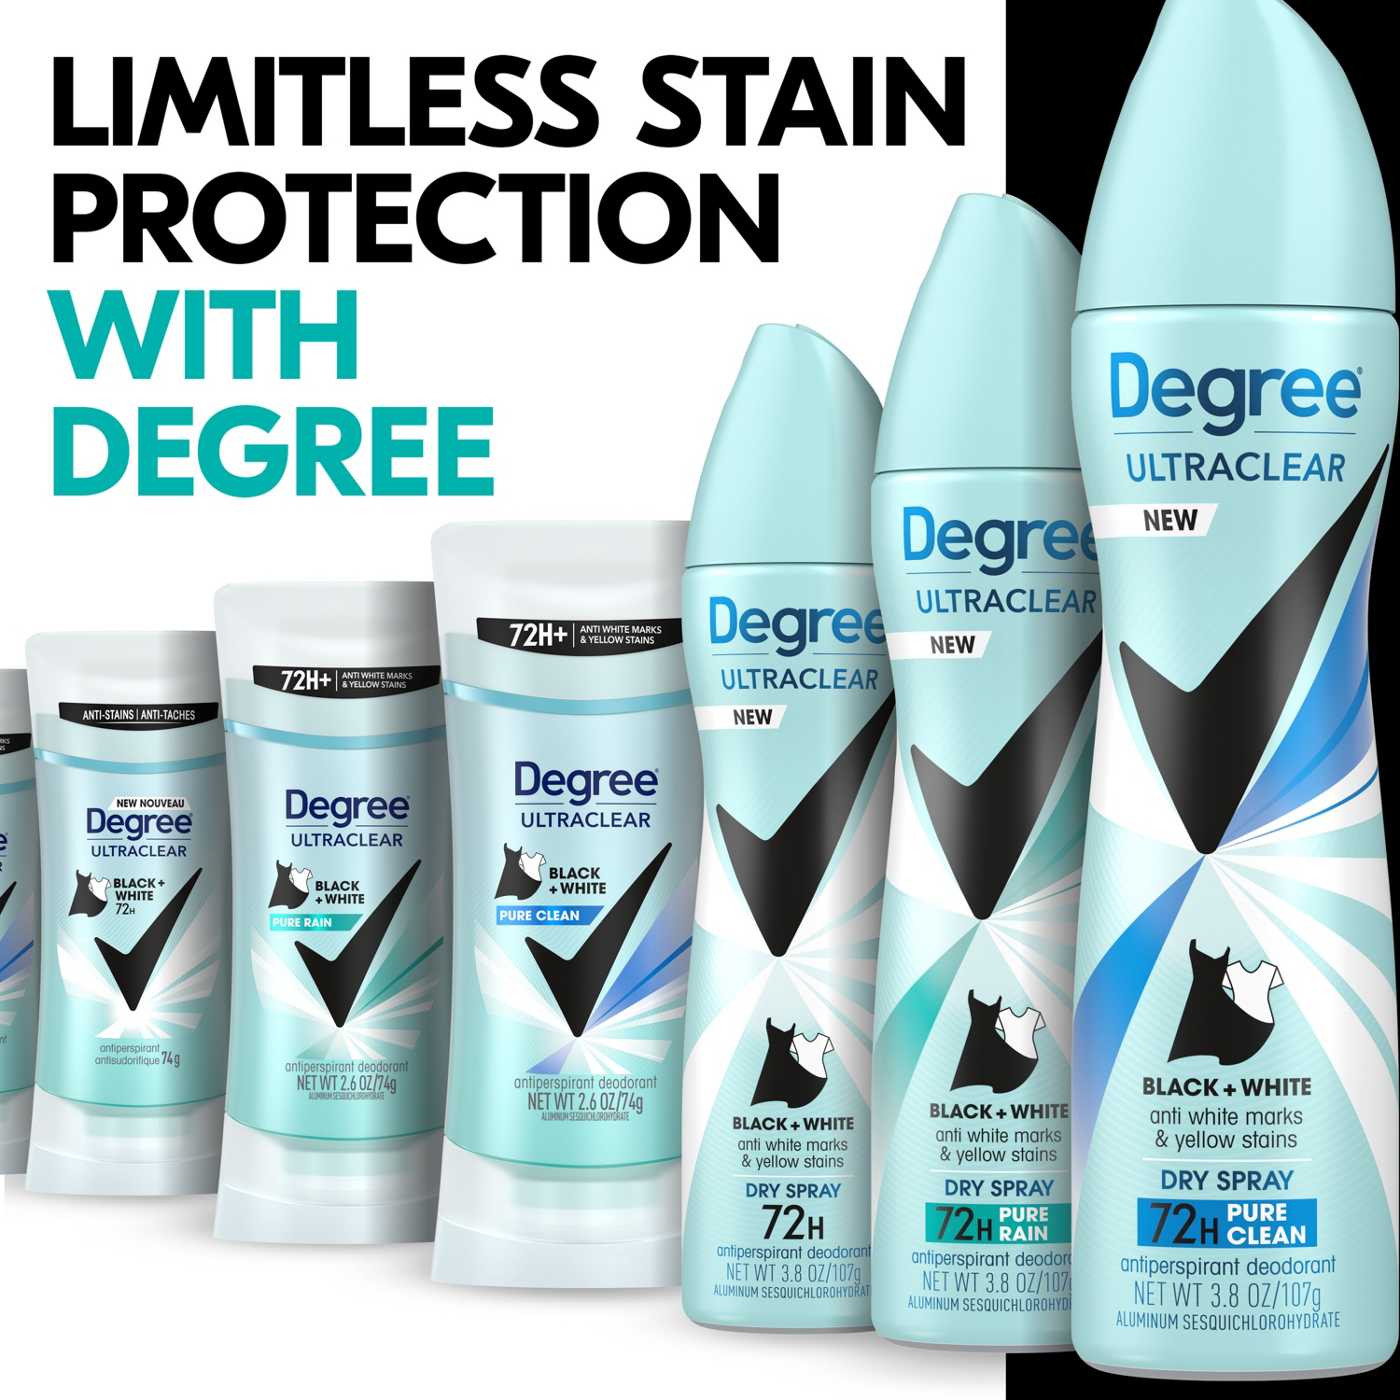 Degree UltraClear Black+White Antiperspirant Deodorant Dry Spray Pure Clean; image 4 of 6